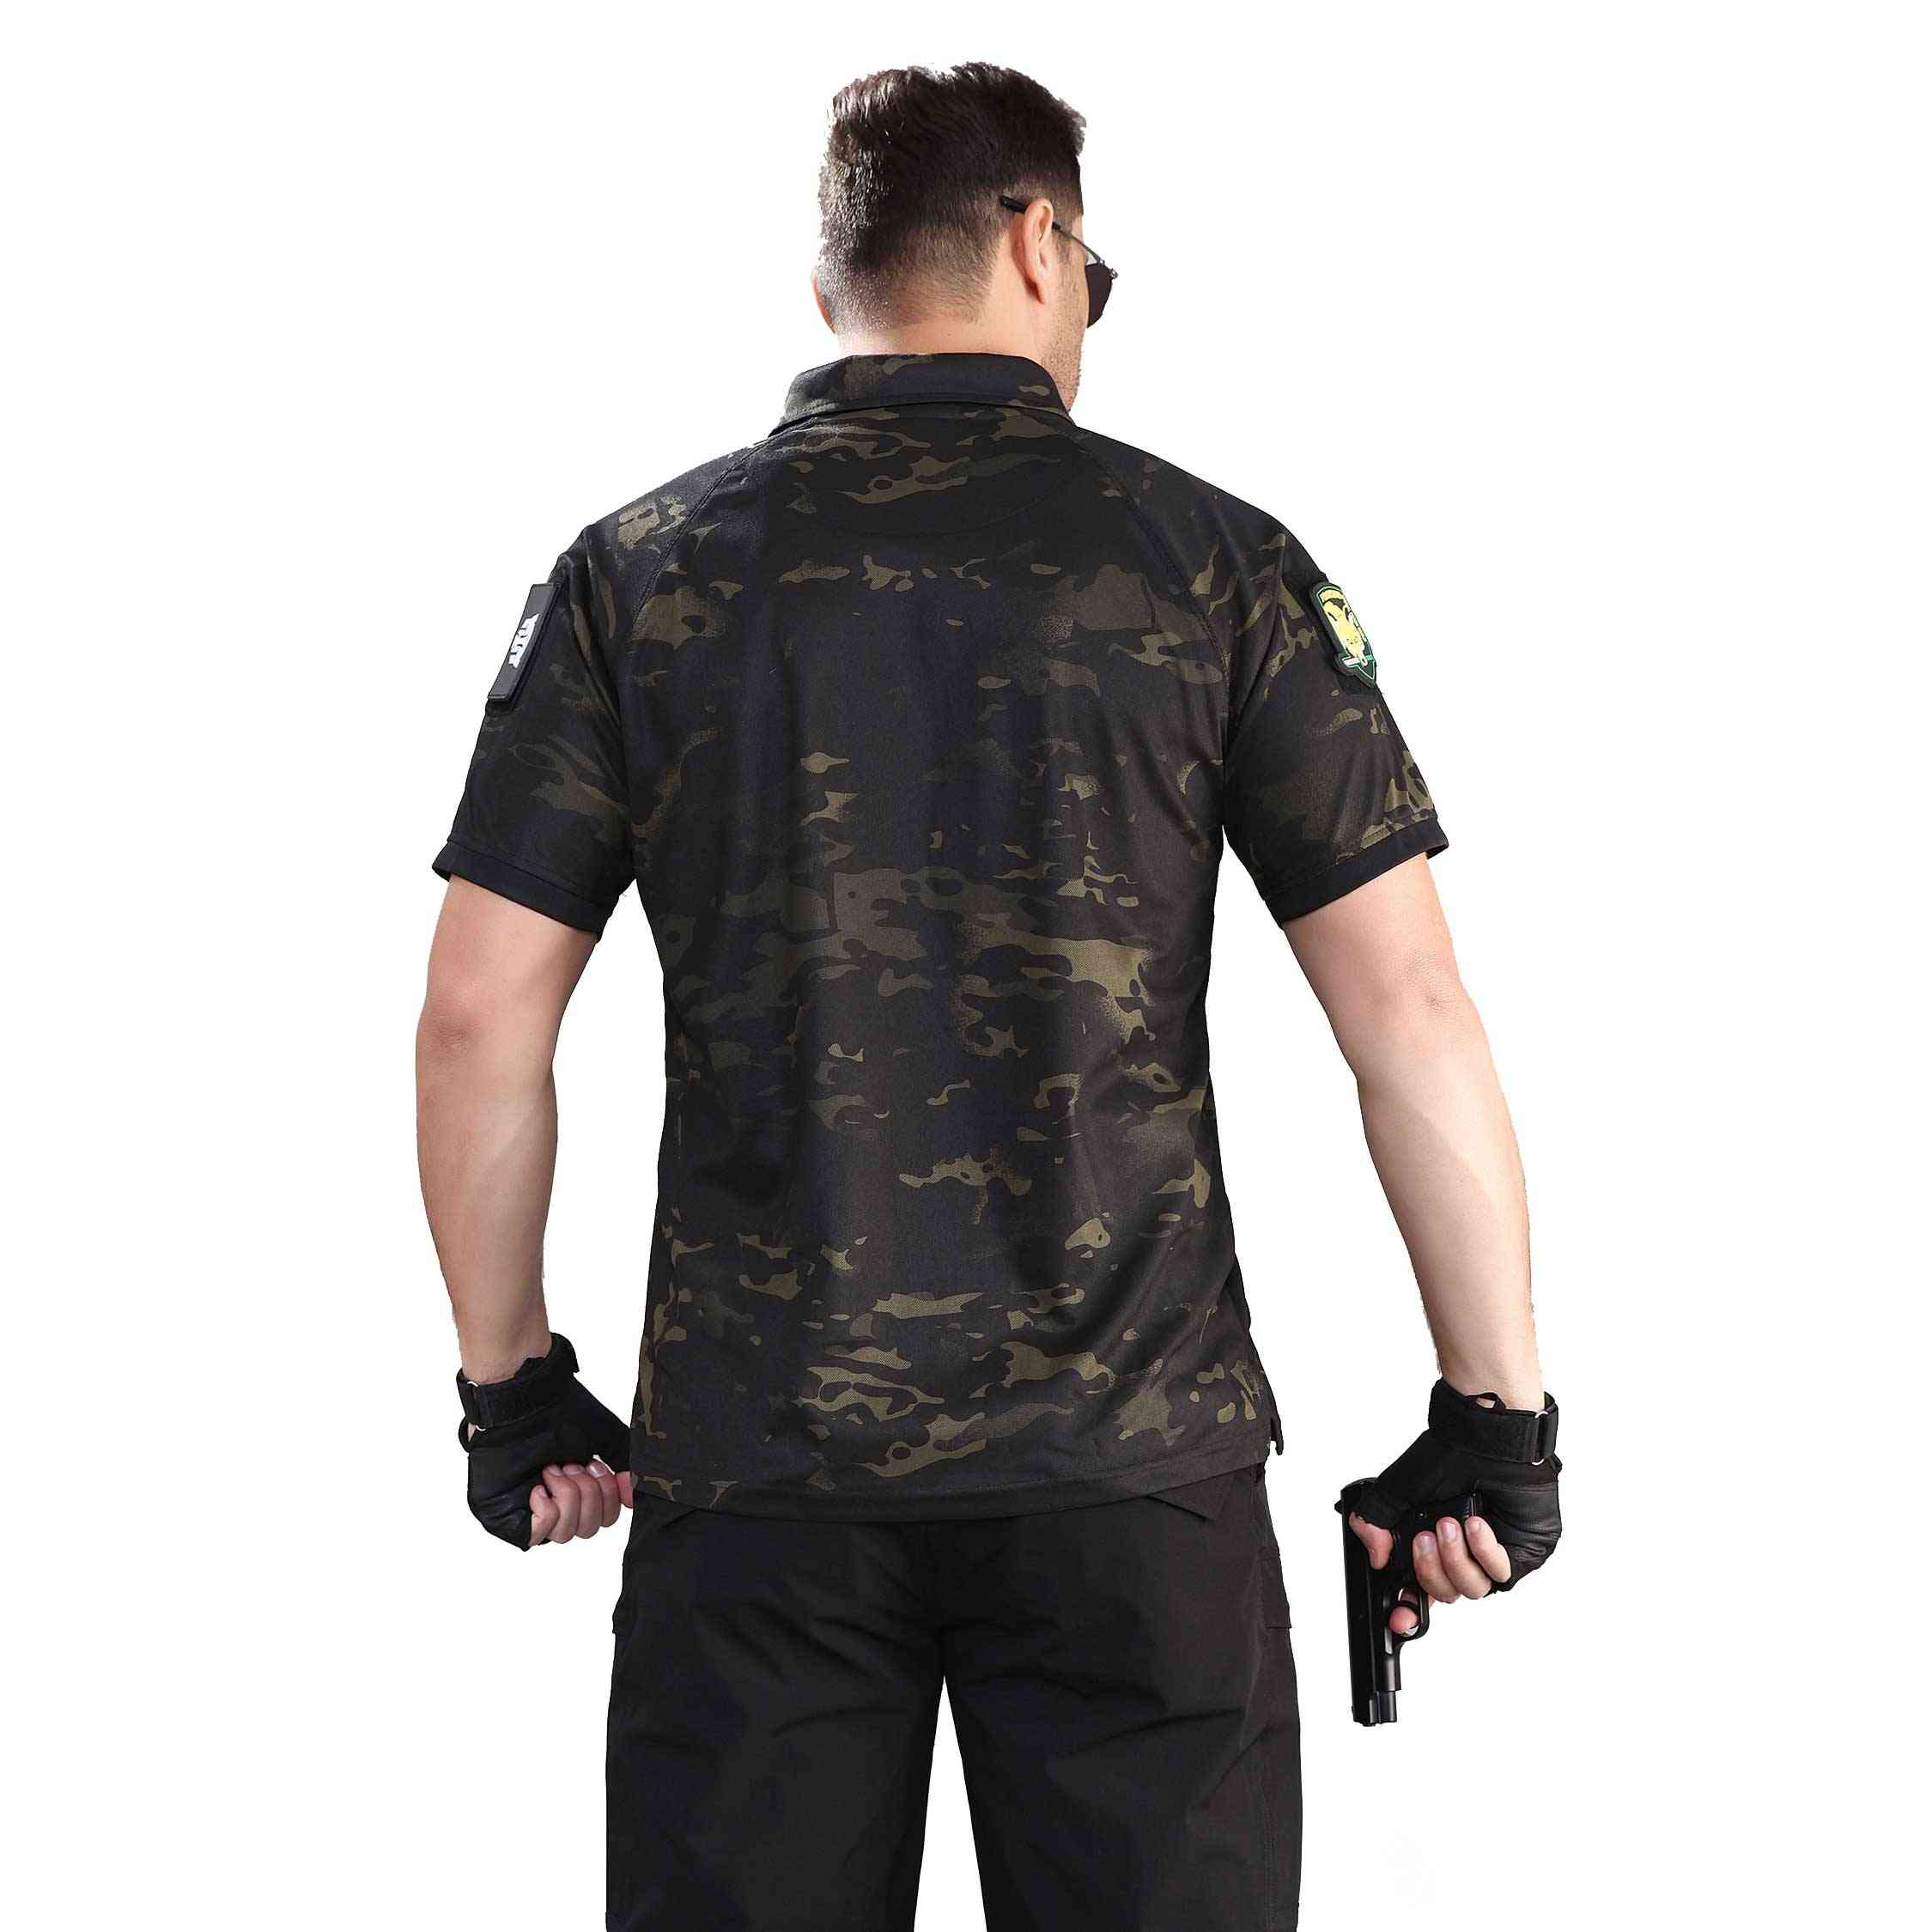 Outdoor Sports Camouflage T-shirt